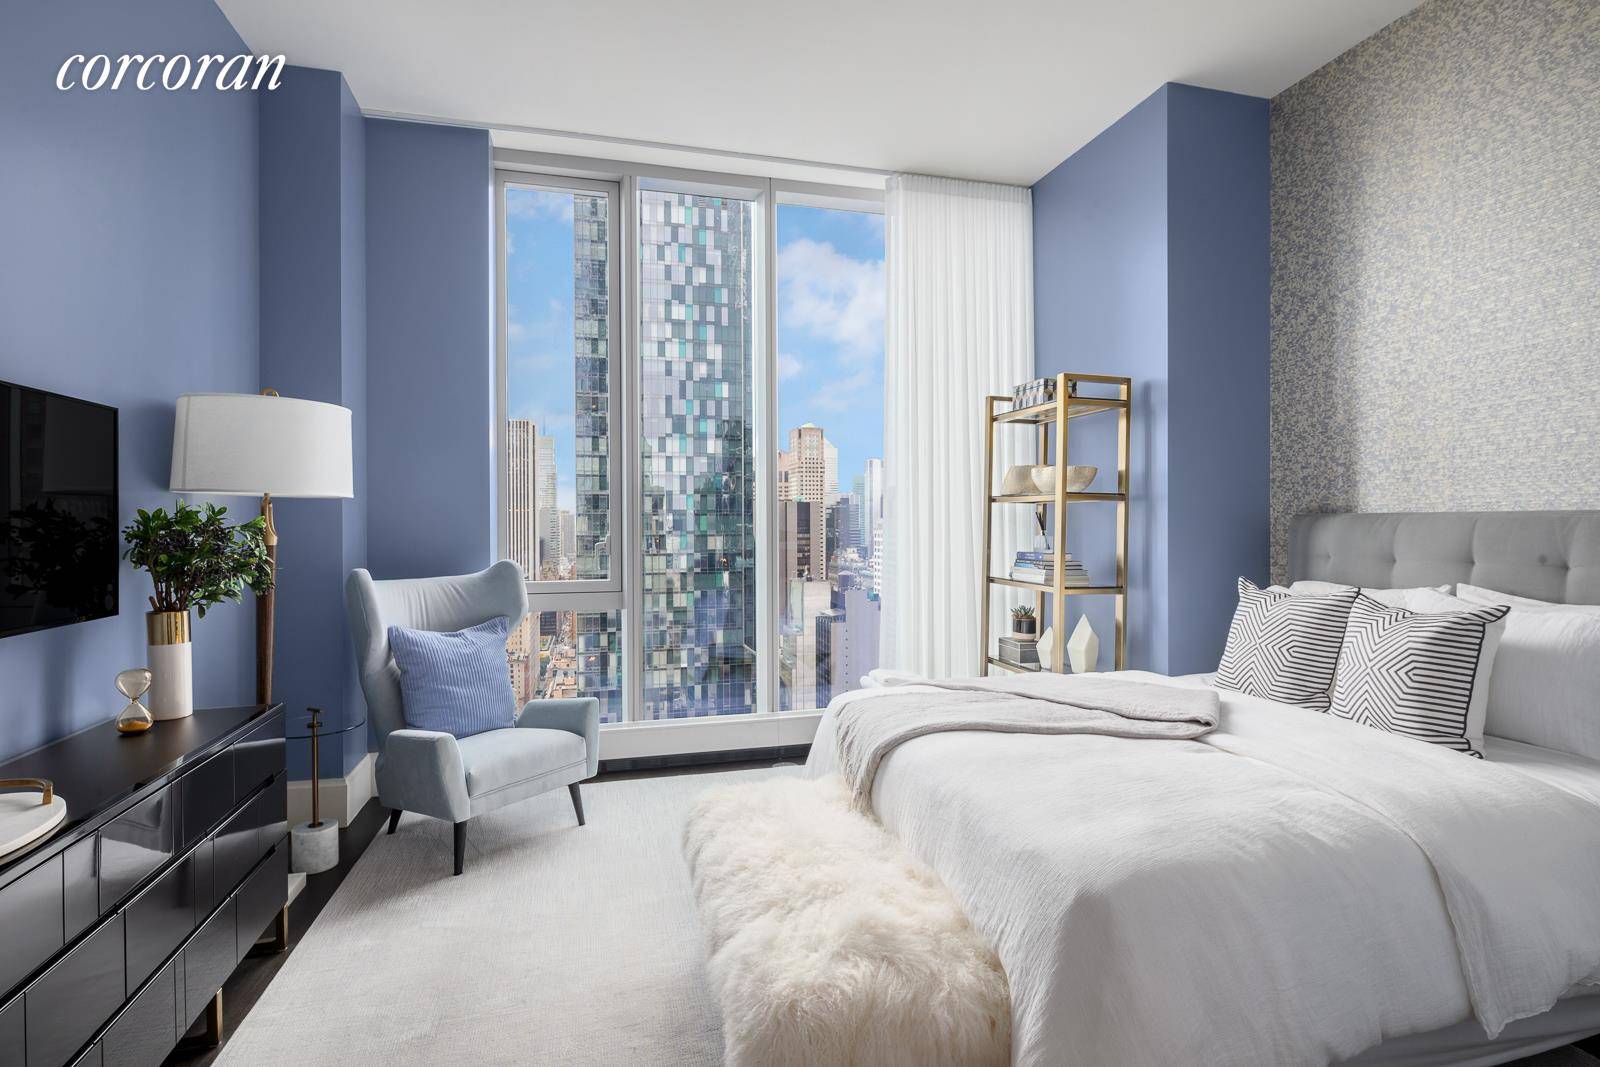 This corner three bedroom, three and one half bathroom residence at Central Park Tower offers quintessential Central Park views from an elevation of 400 feet.